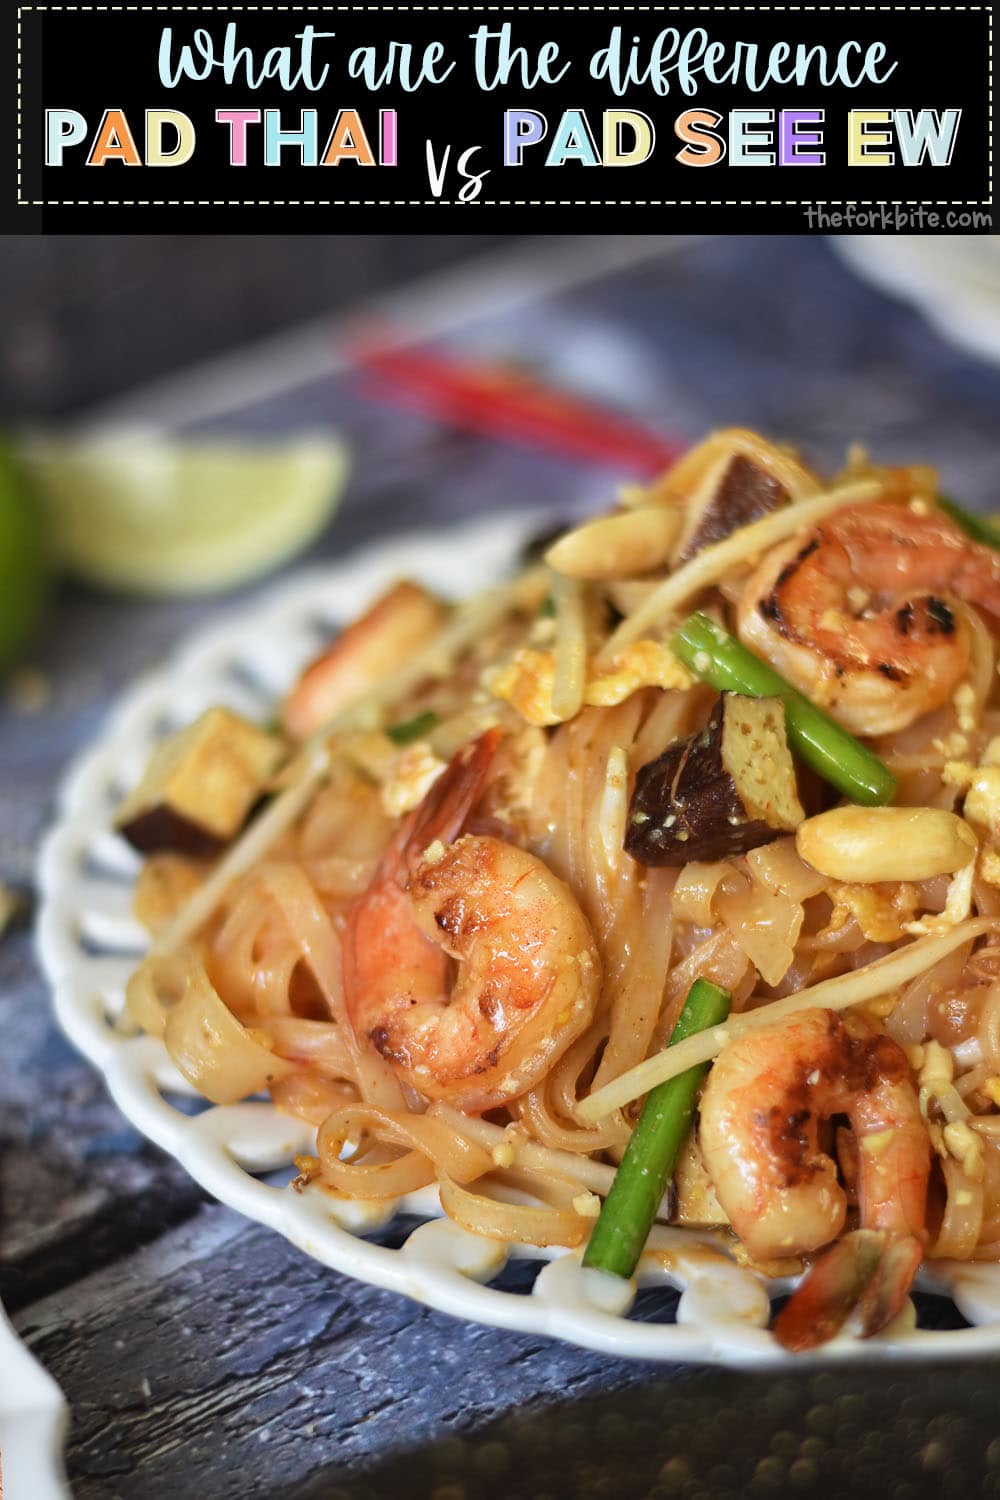 In Pad Thai, you use thinner rice noodles and stir-fry with tamarind and garnish with peanuts. For Pad See Ew, you use wide rice noodles, which you stir-fry with soy sauce